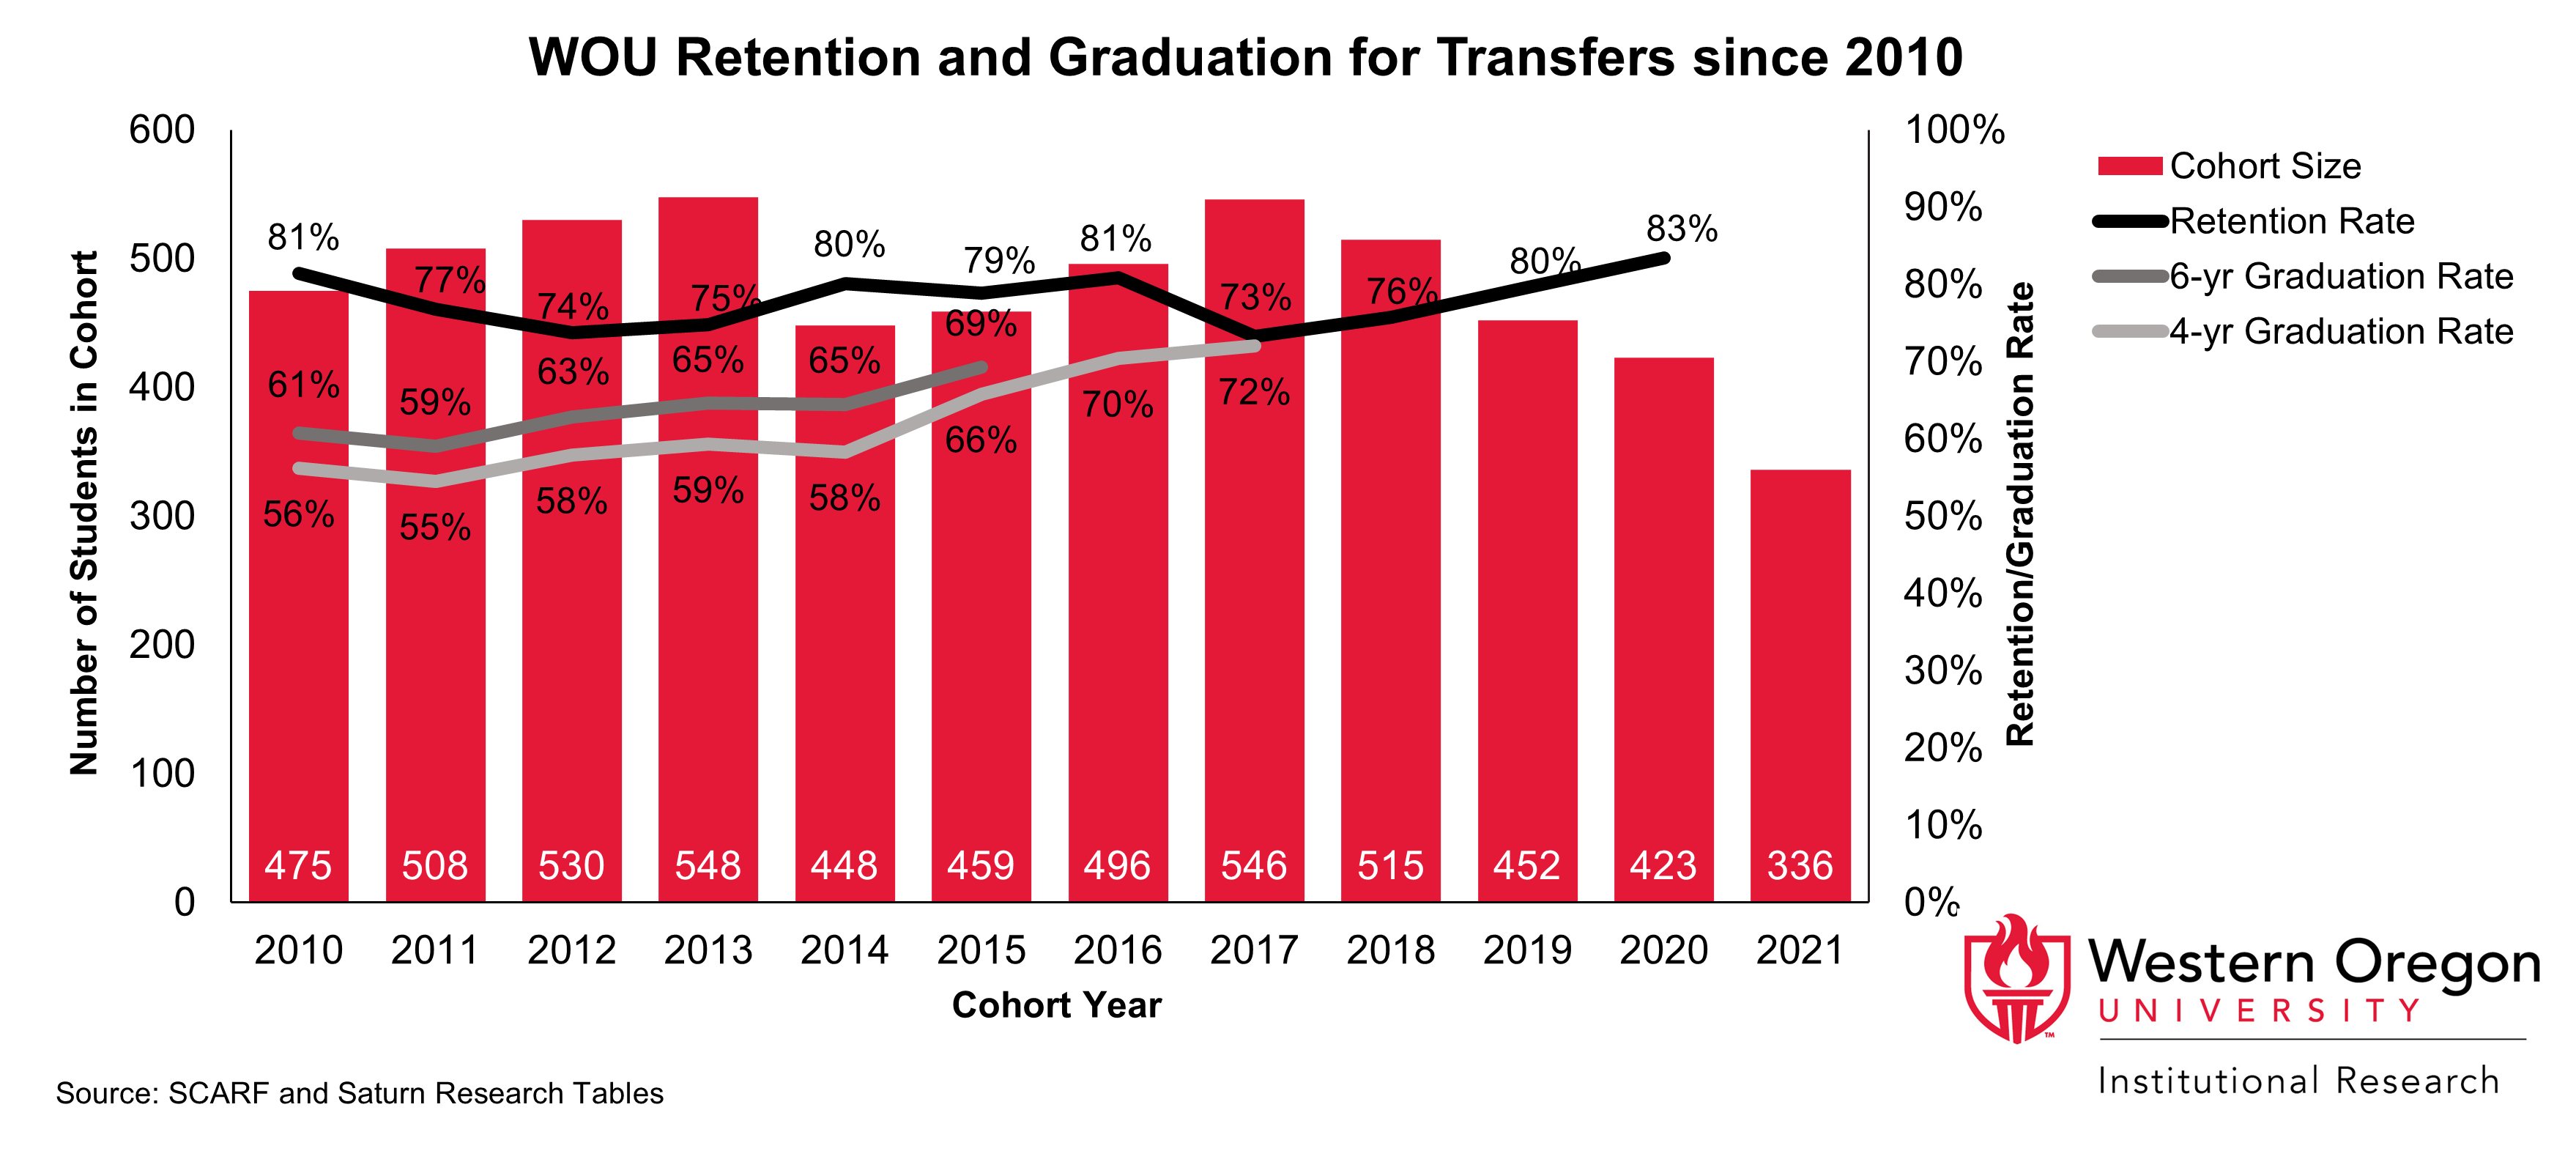 Bar and line graph of retention and 4- and 6-year graduation rates since 2010 for WOU transfer students, showing that graduation rates have been steadily increasing while retention rates have remained largely stable